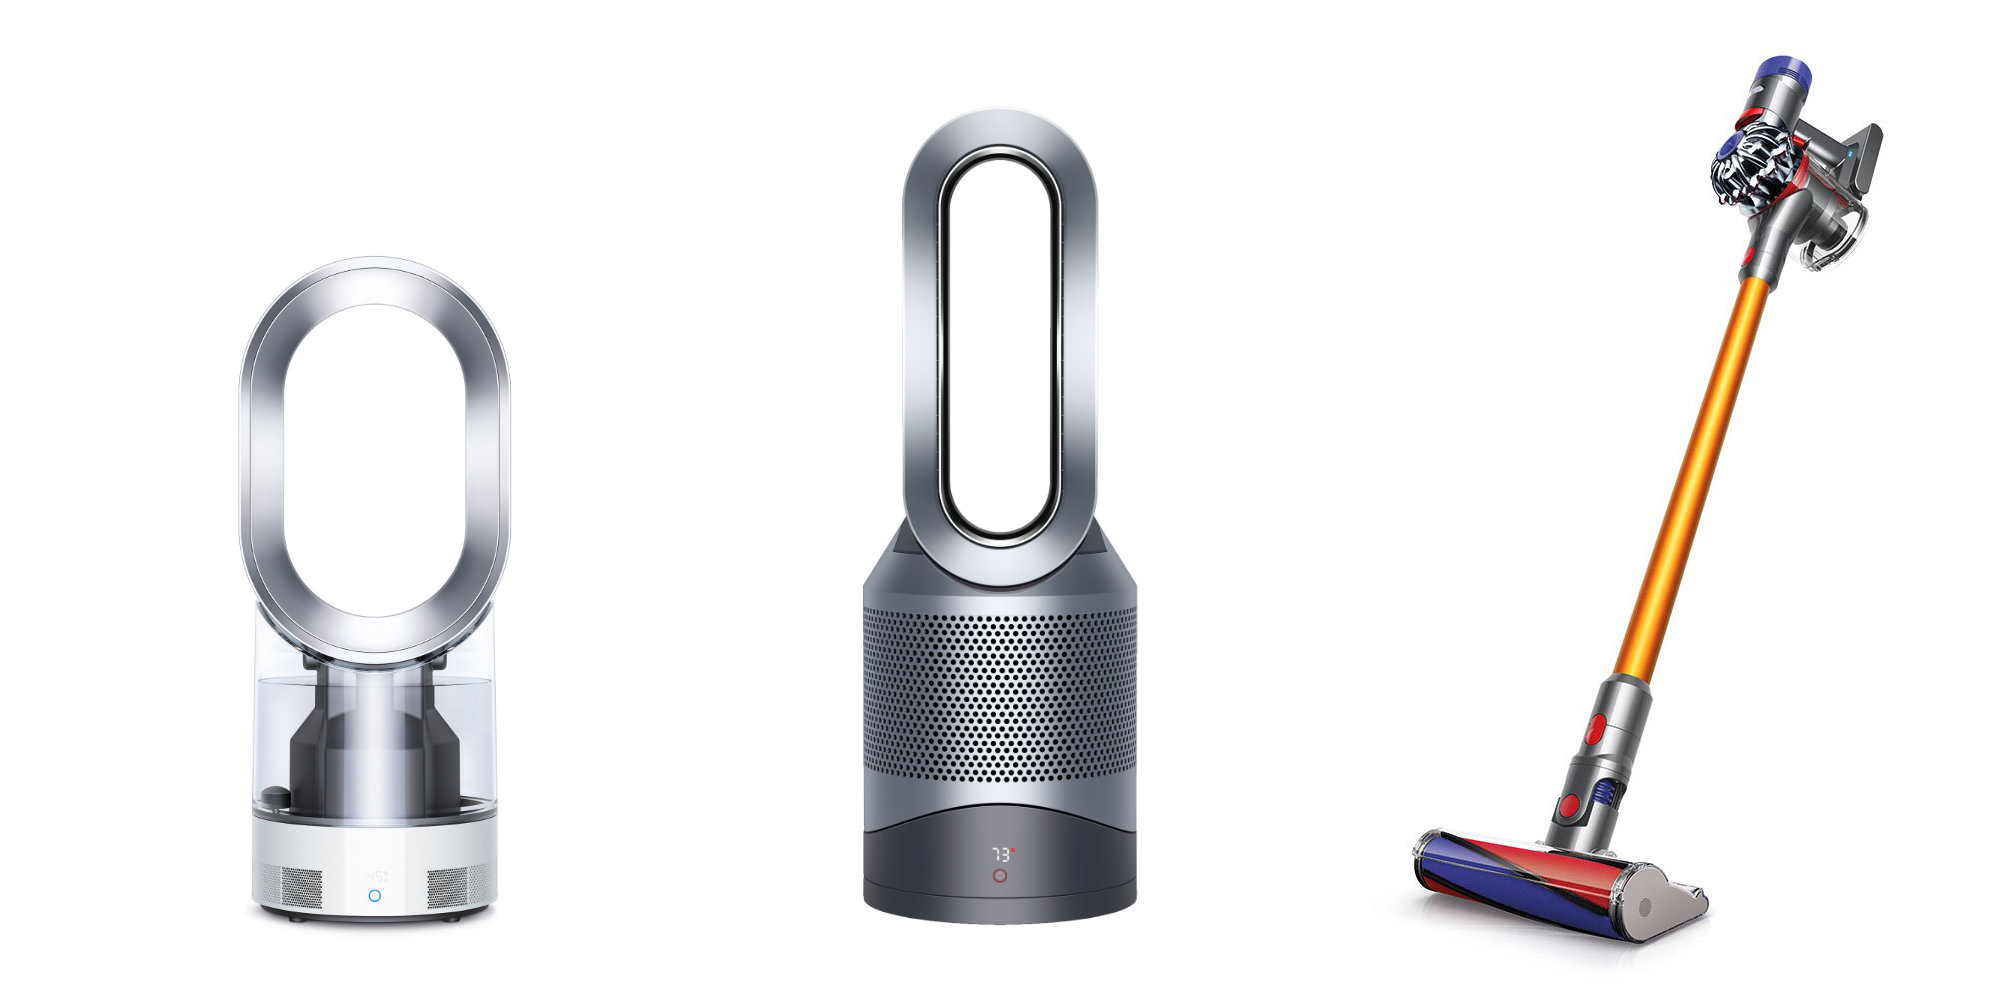 Dyson Sale: Pure Hot + Cool $160 (Refurb, Orig. $499), V8 Absolute $220